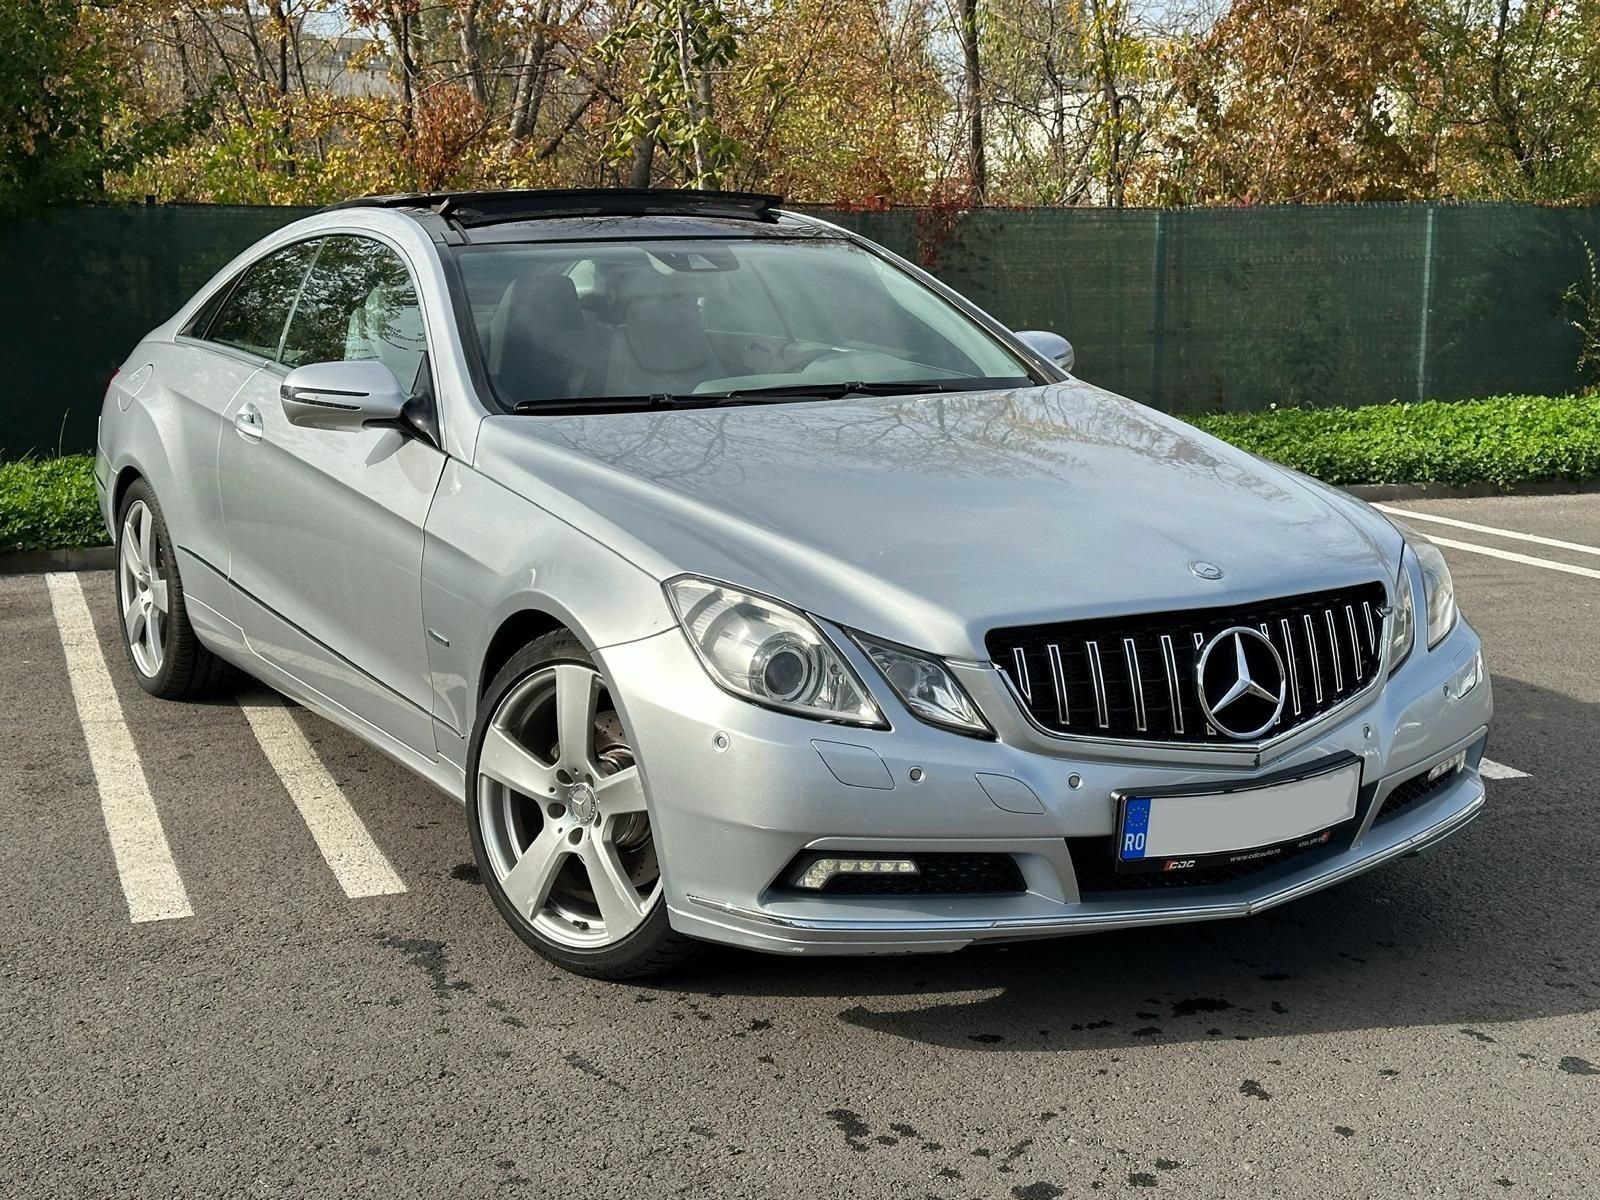 Mercedes E350 CDI 245CP Coupe • AMG / Sport • Automat • 2010 • Pano